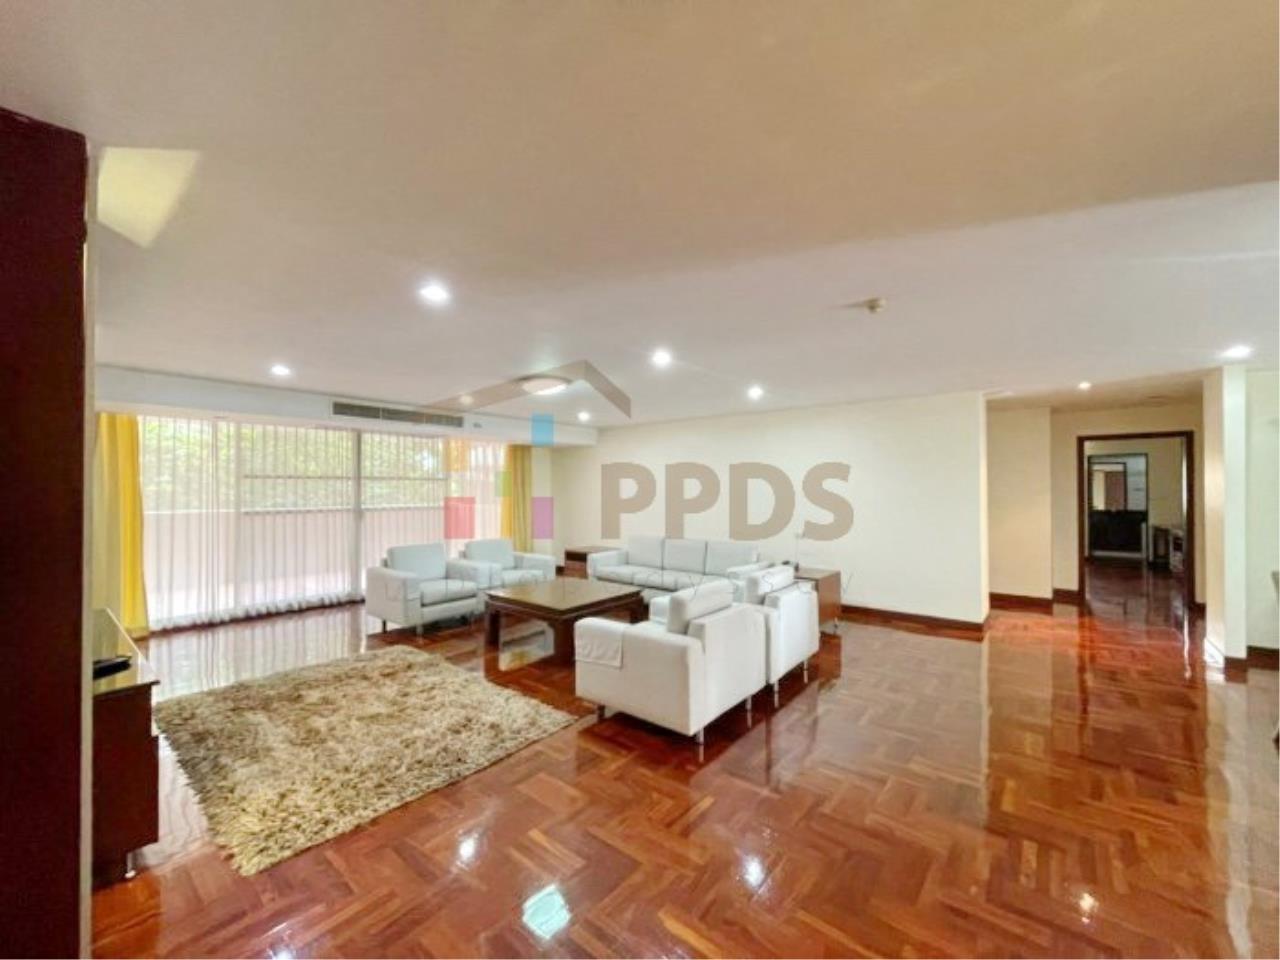 Propodyssey Agency's 3 Bedrooms for rent with big balcony in Sukhumvit soi 24 2